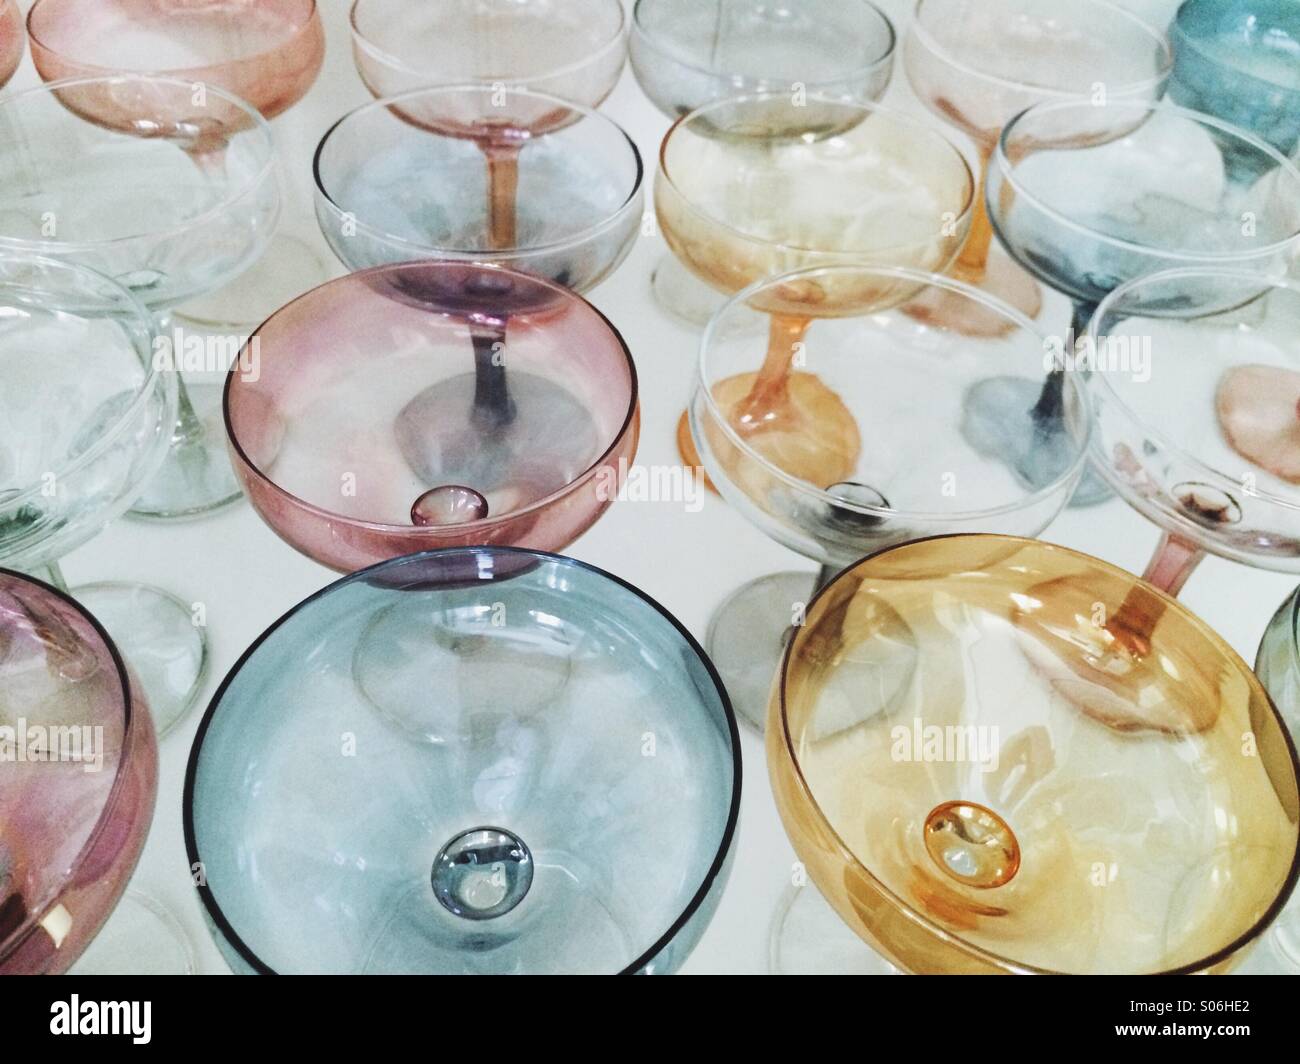 Coupe glass hi-res and images - Alamy